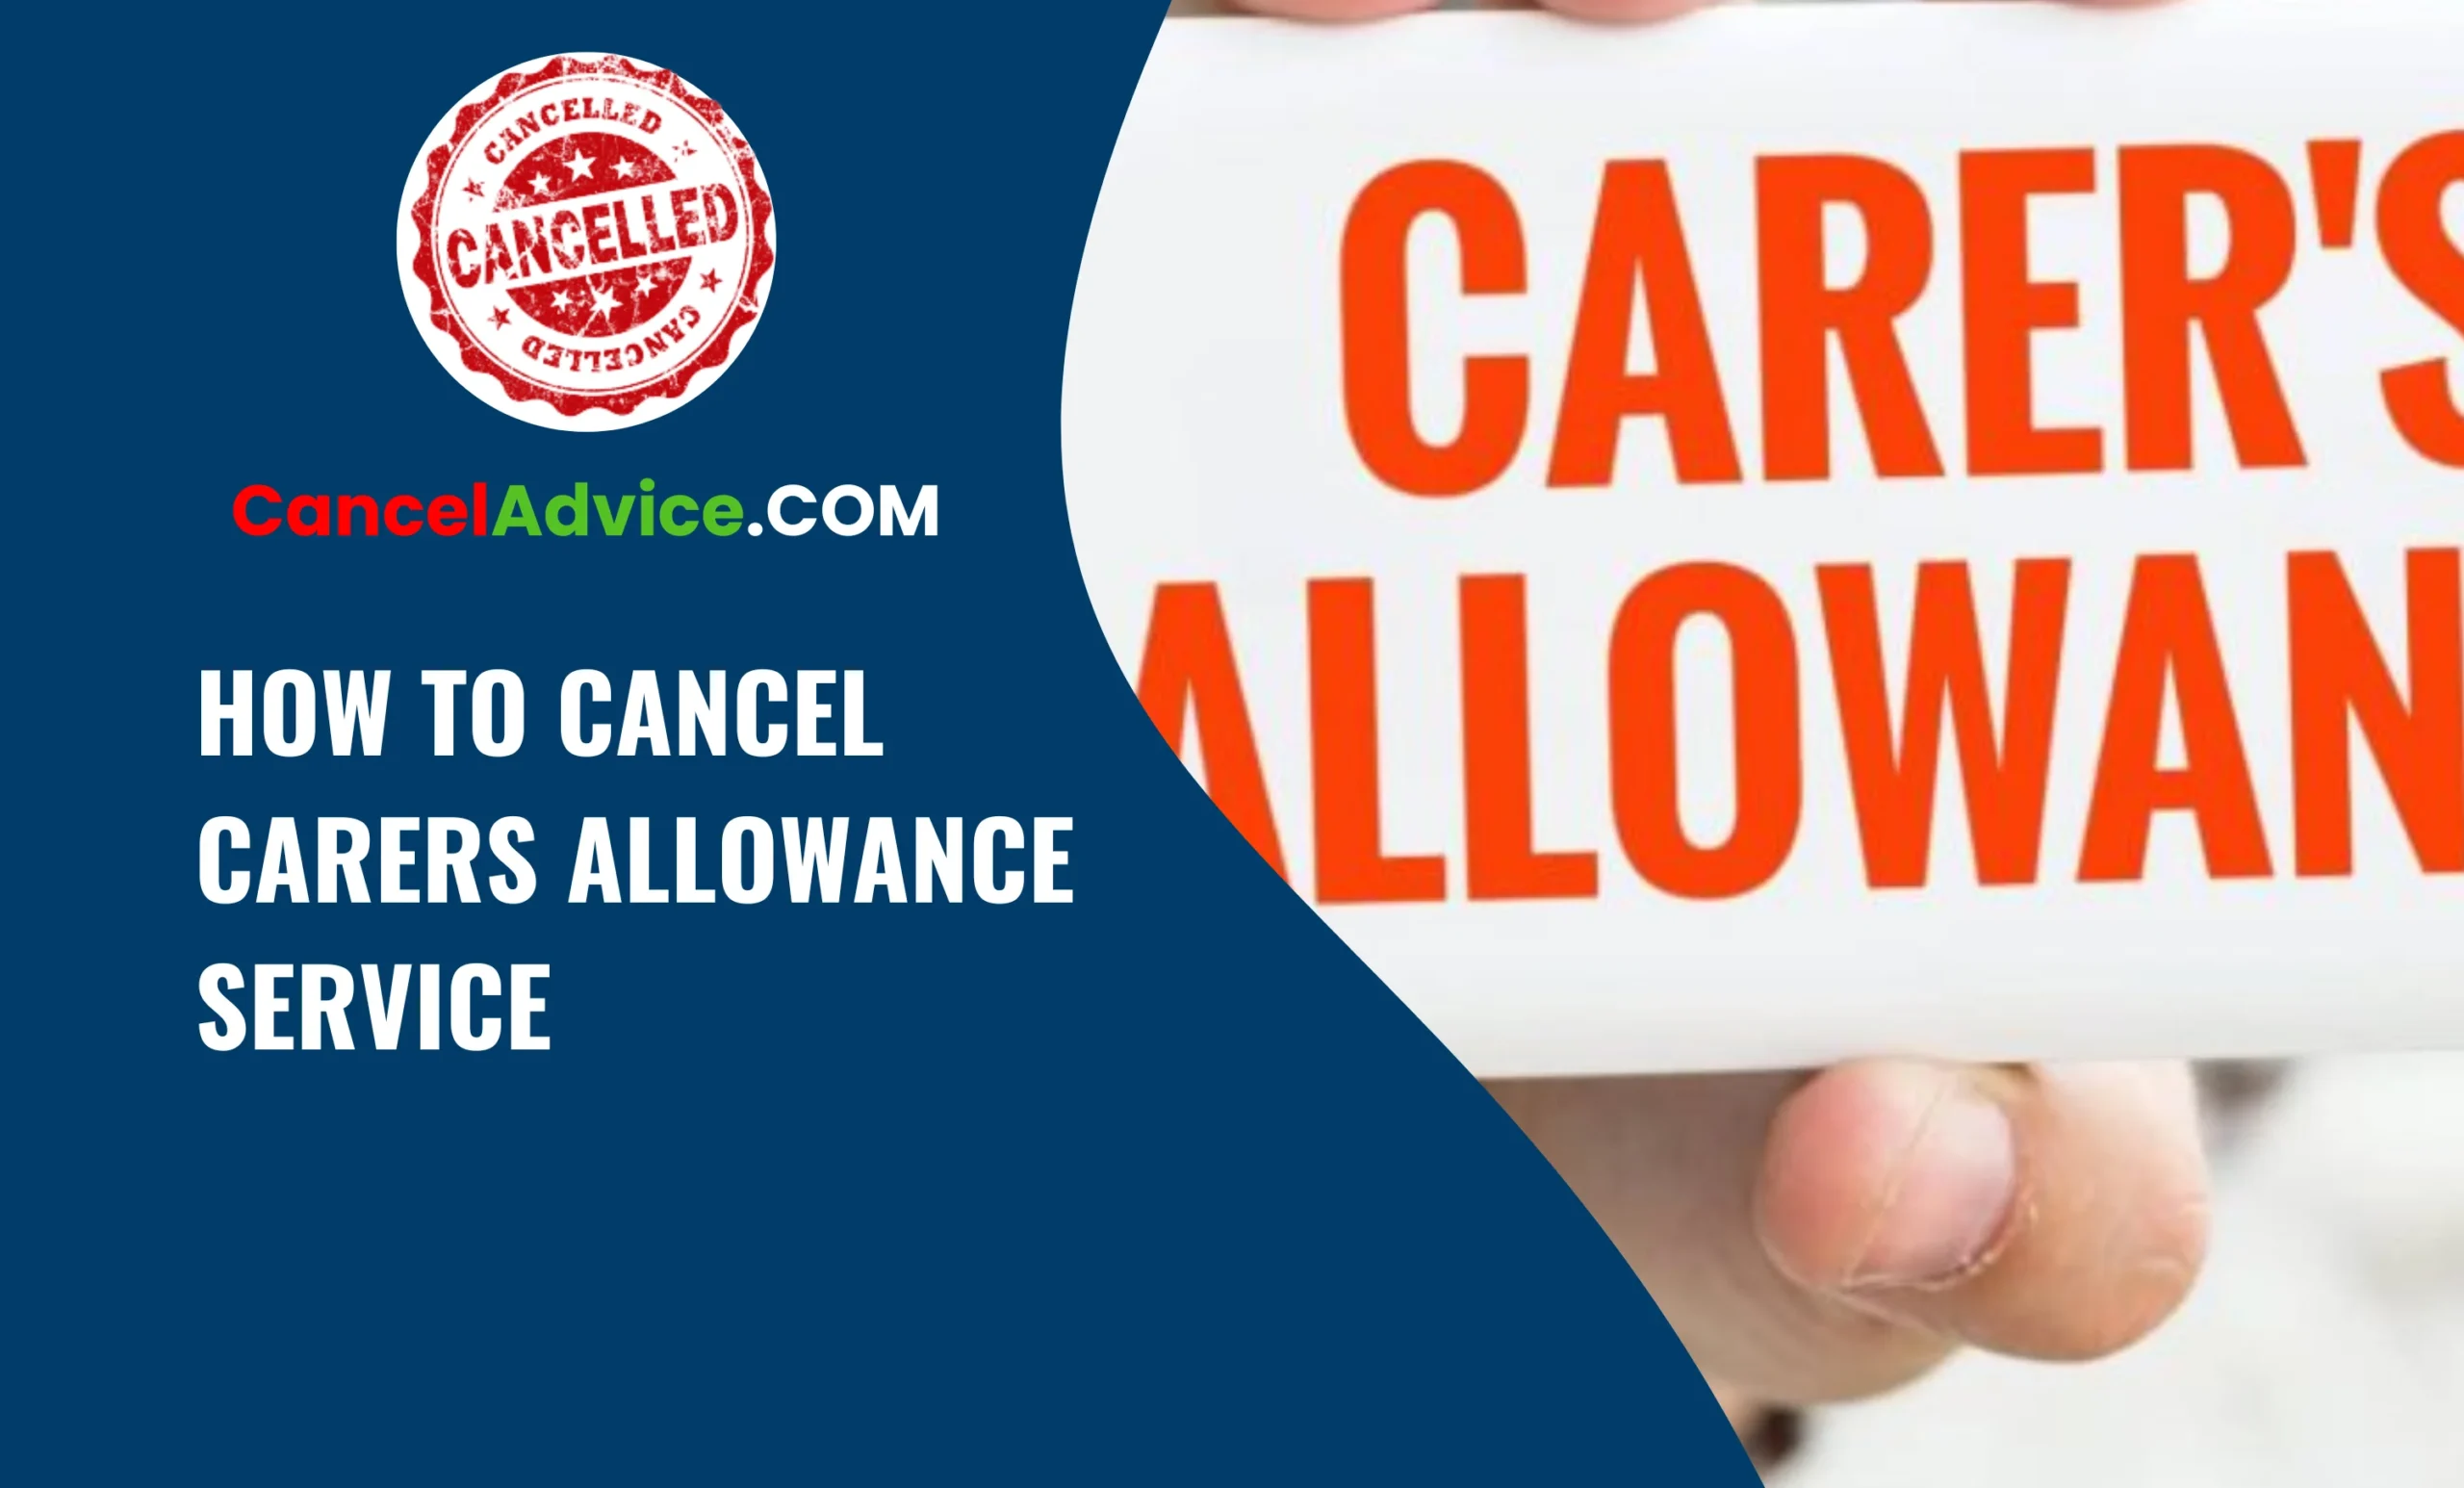 How to Cancel Carer's Allowance Service